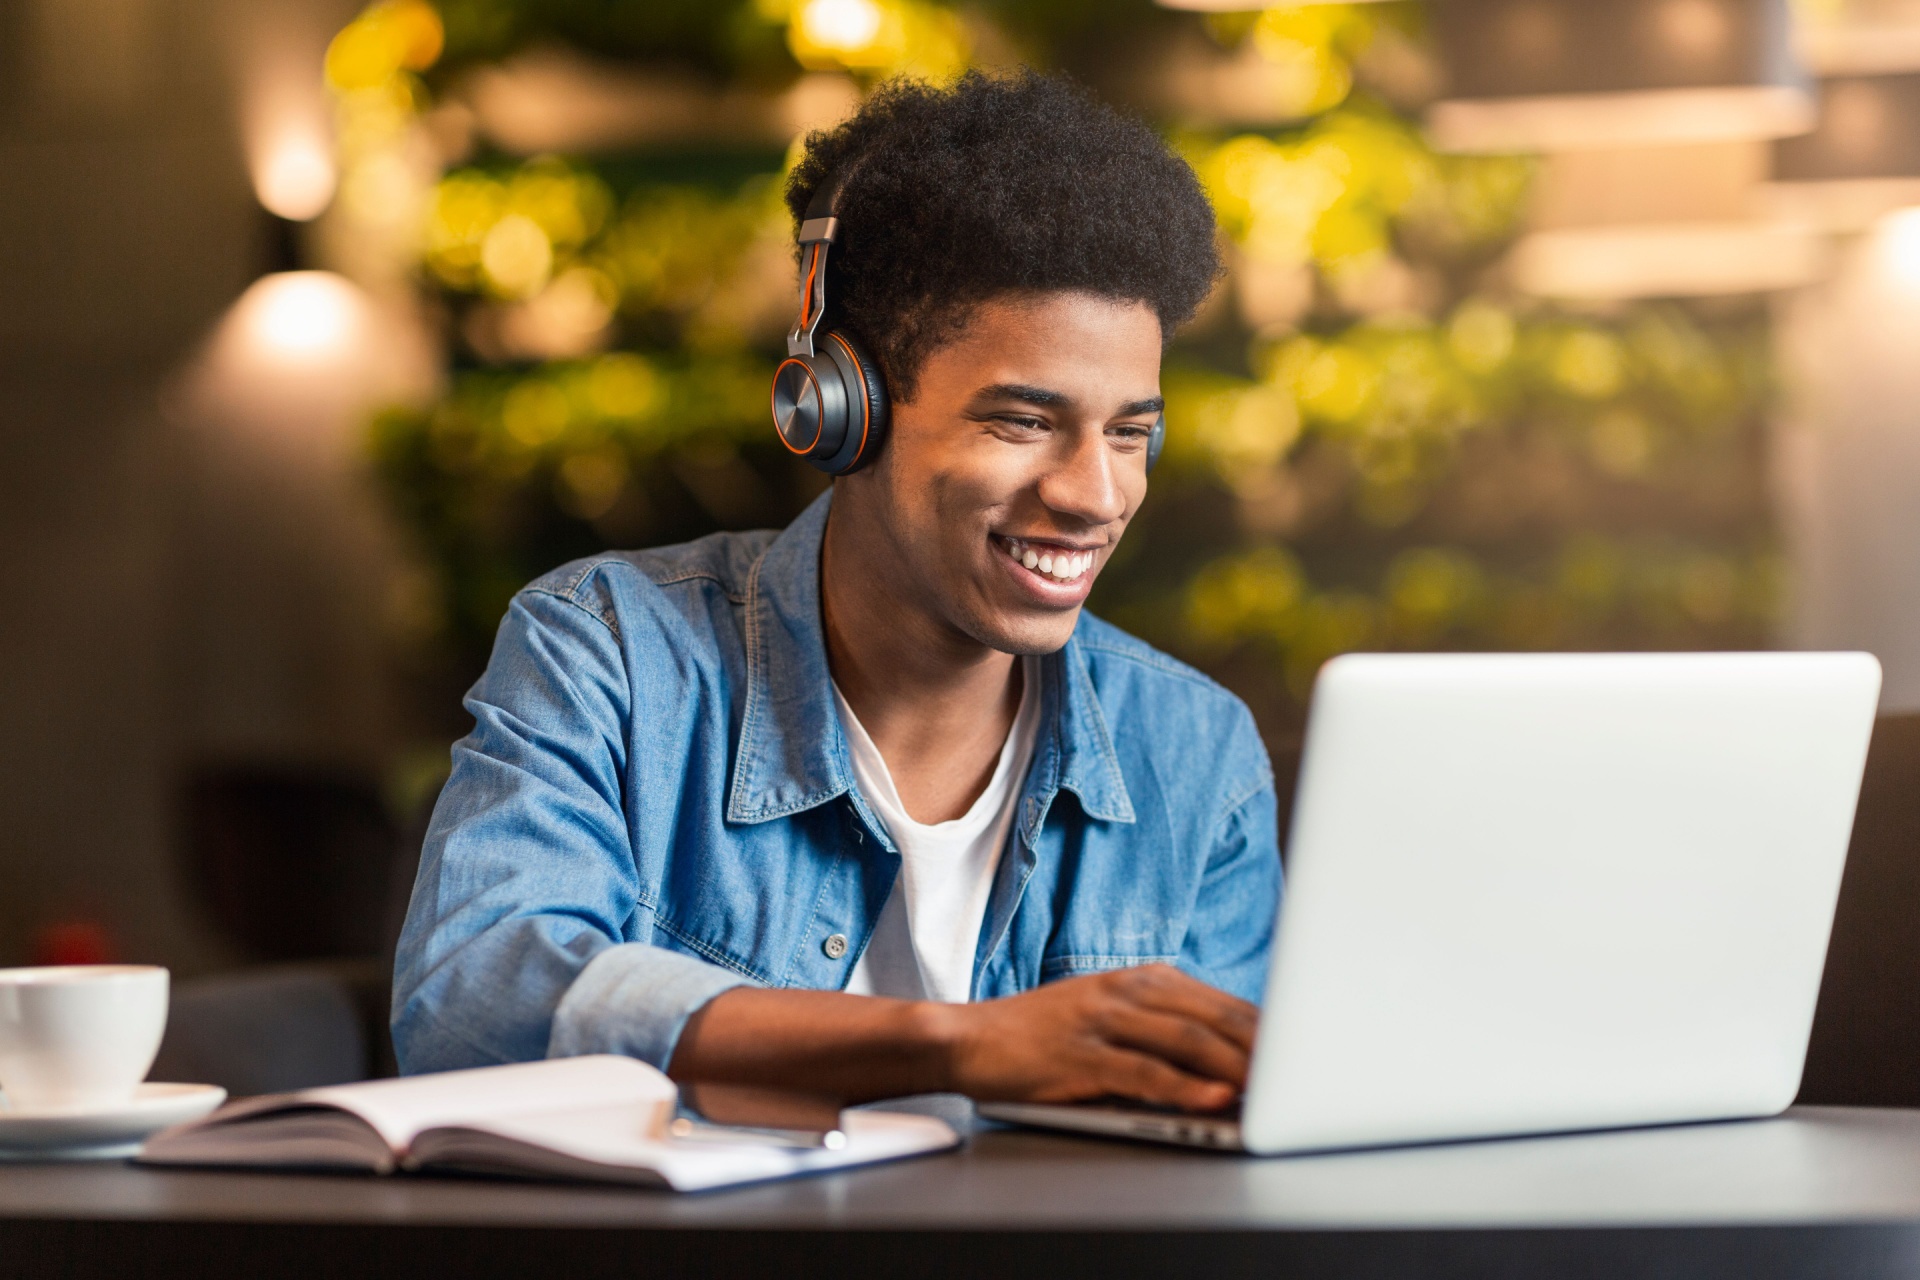 Young man on laptop smiling 